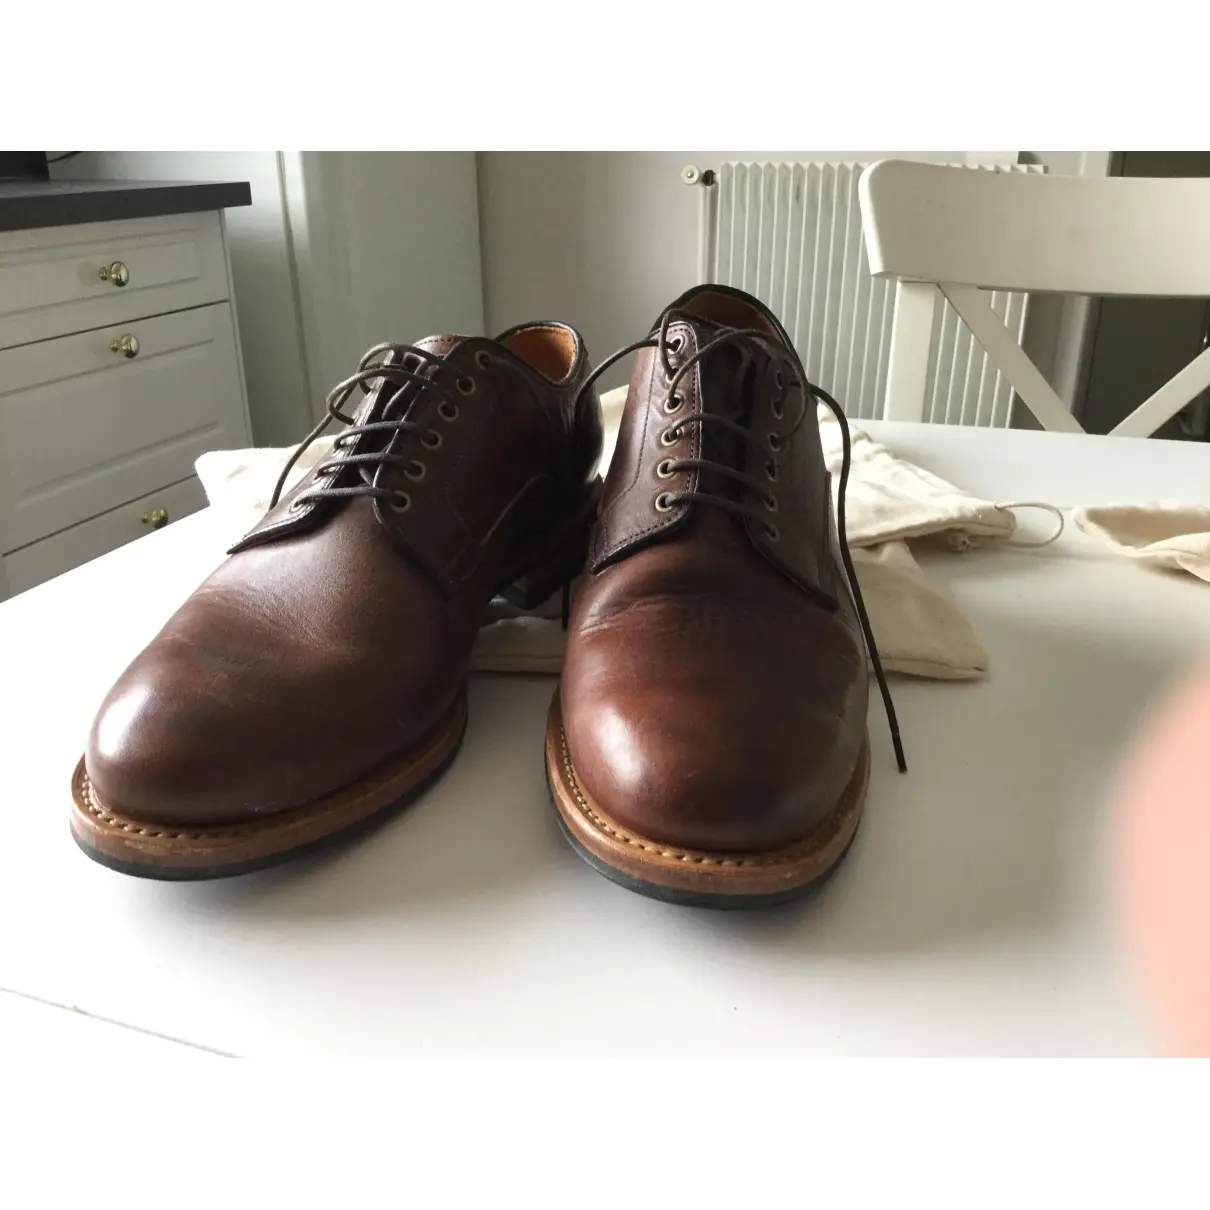 Viberg Leather lace ups for sale